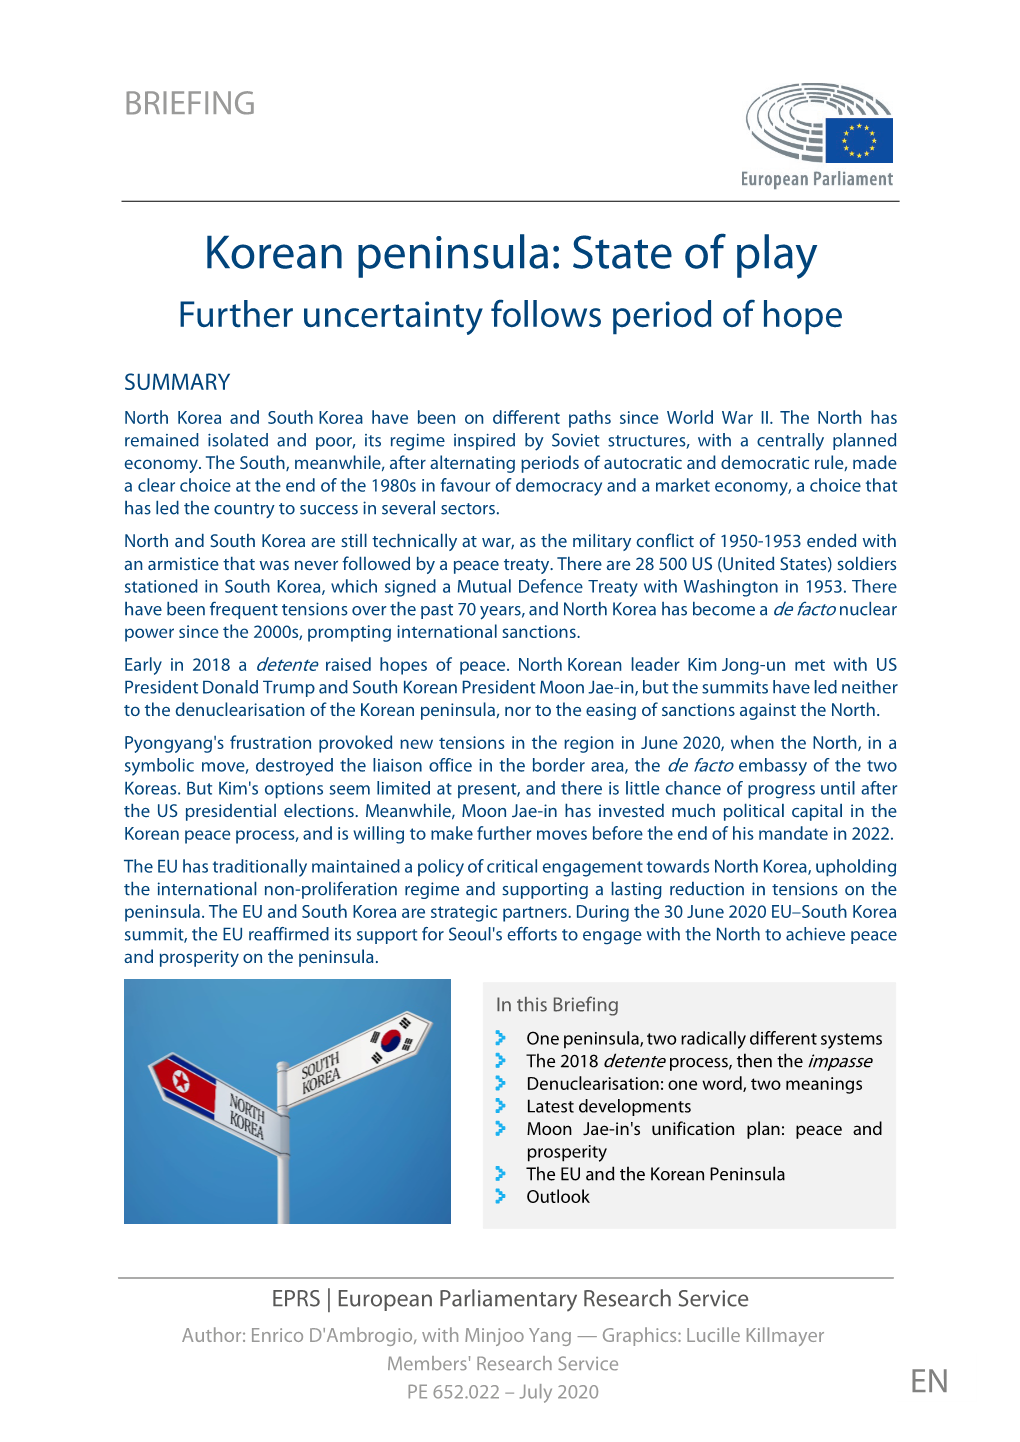 Korean Peninsula: State of Play Further Uncertainty Follows Period of Hope